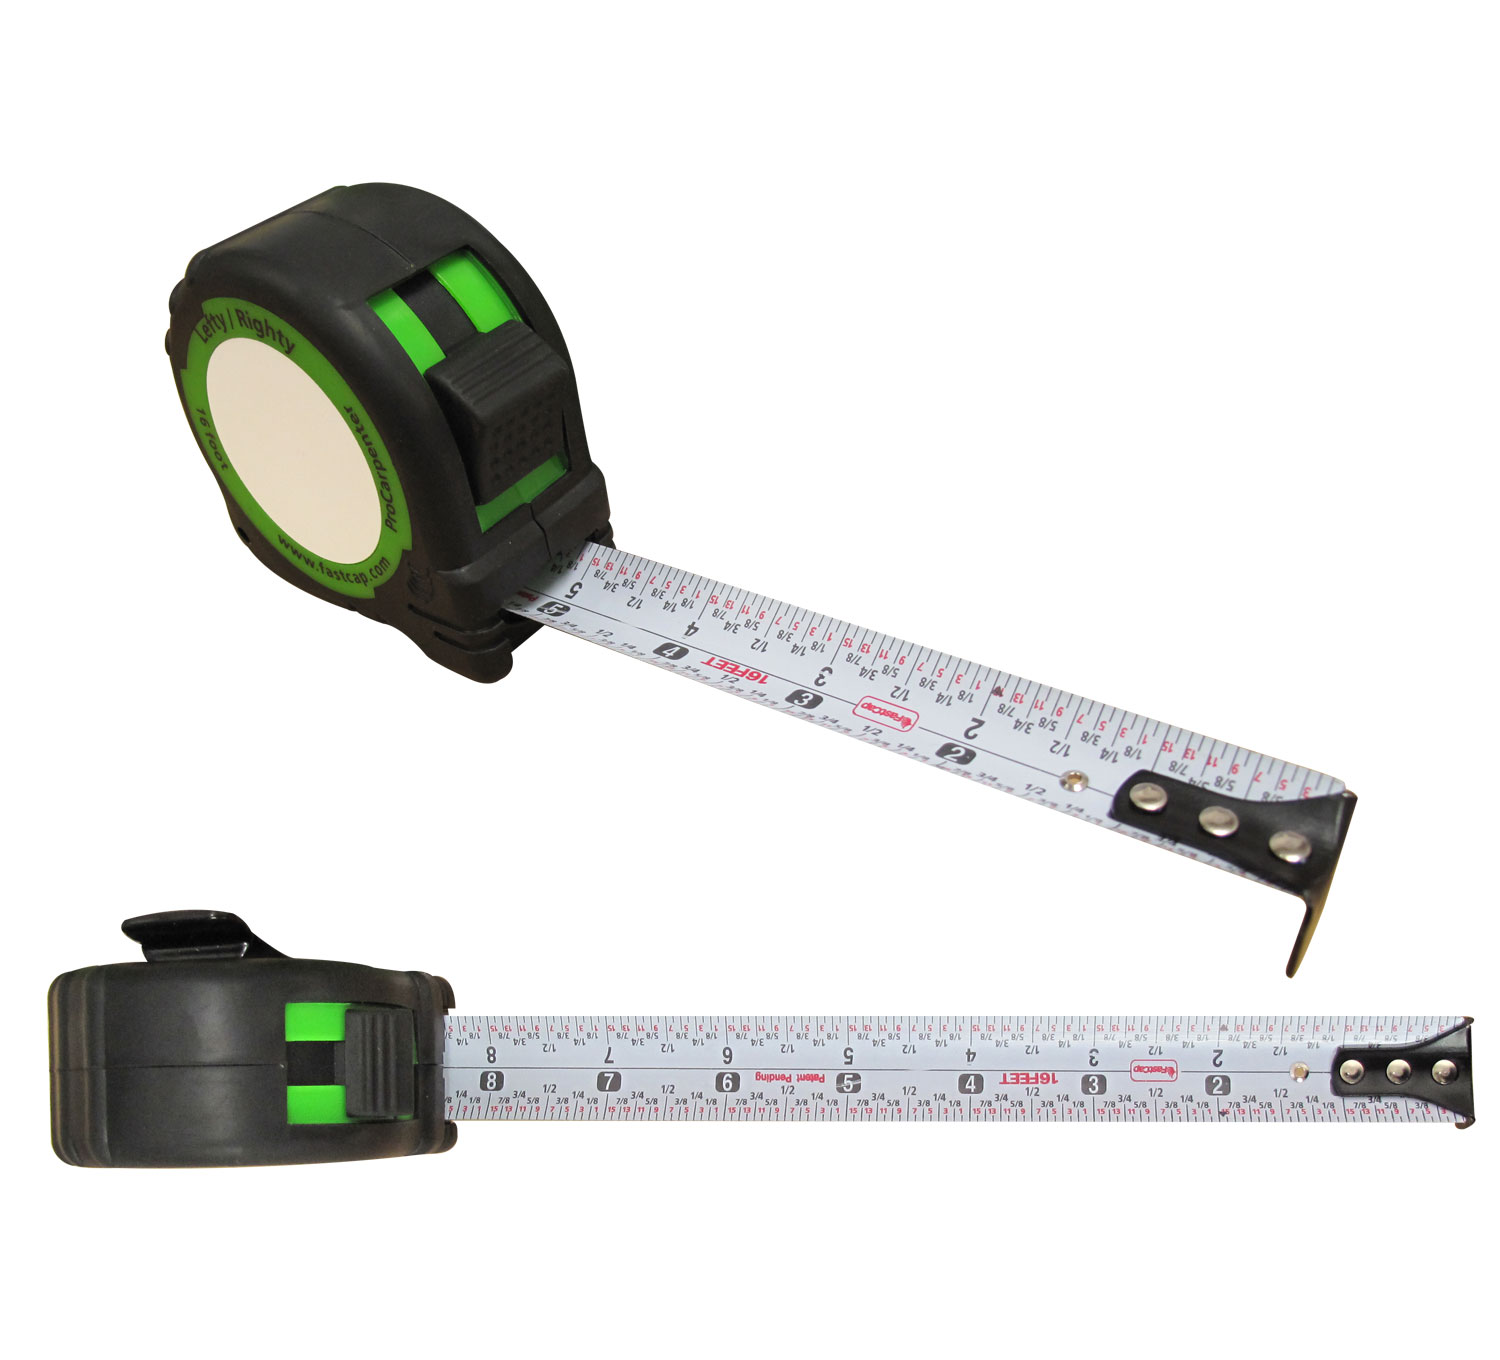 Fastcap PS-16 16-Feet Old Standby ProCarpenter Tape Measure Paint Sundries Solutions